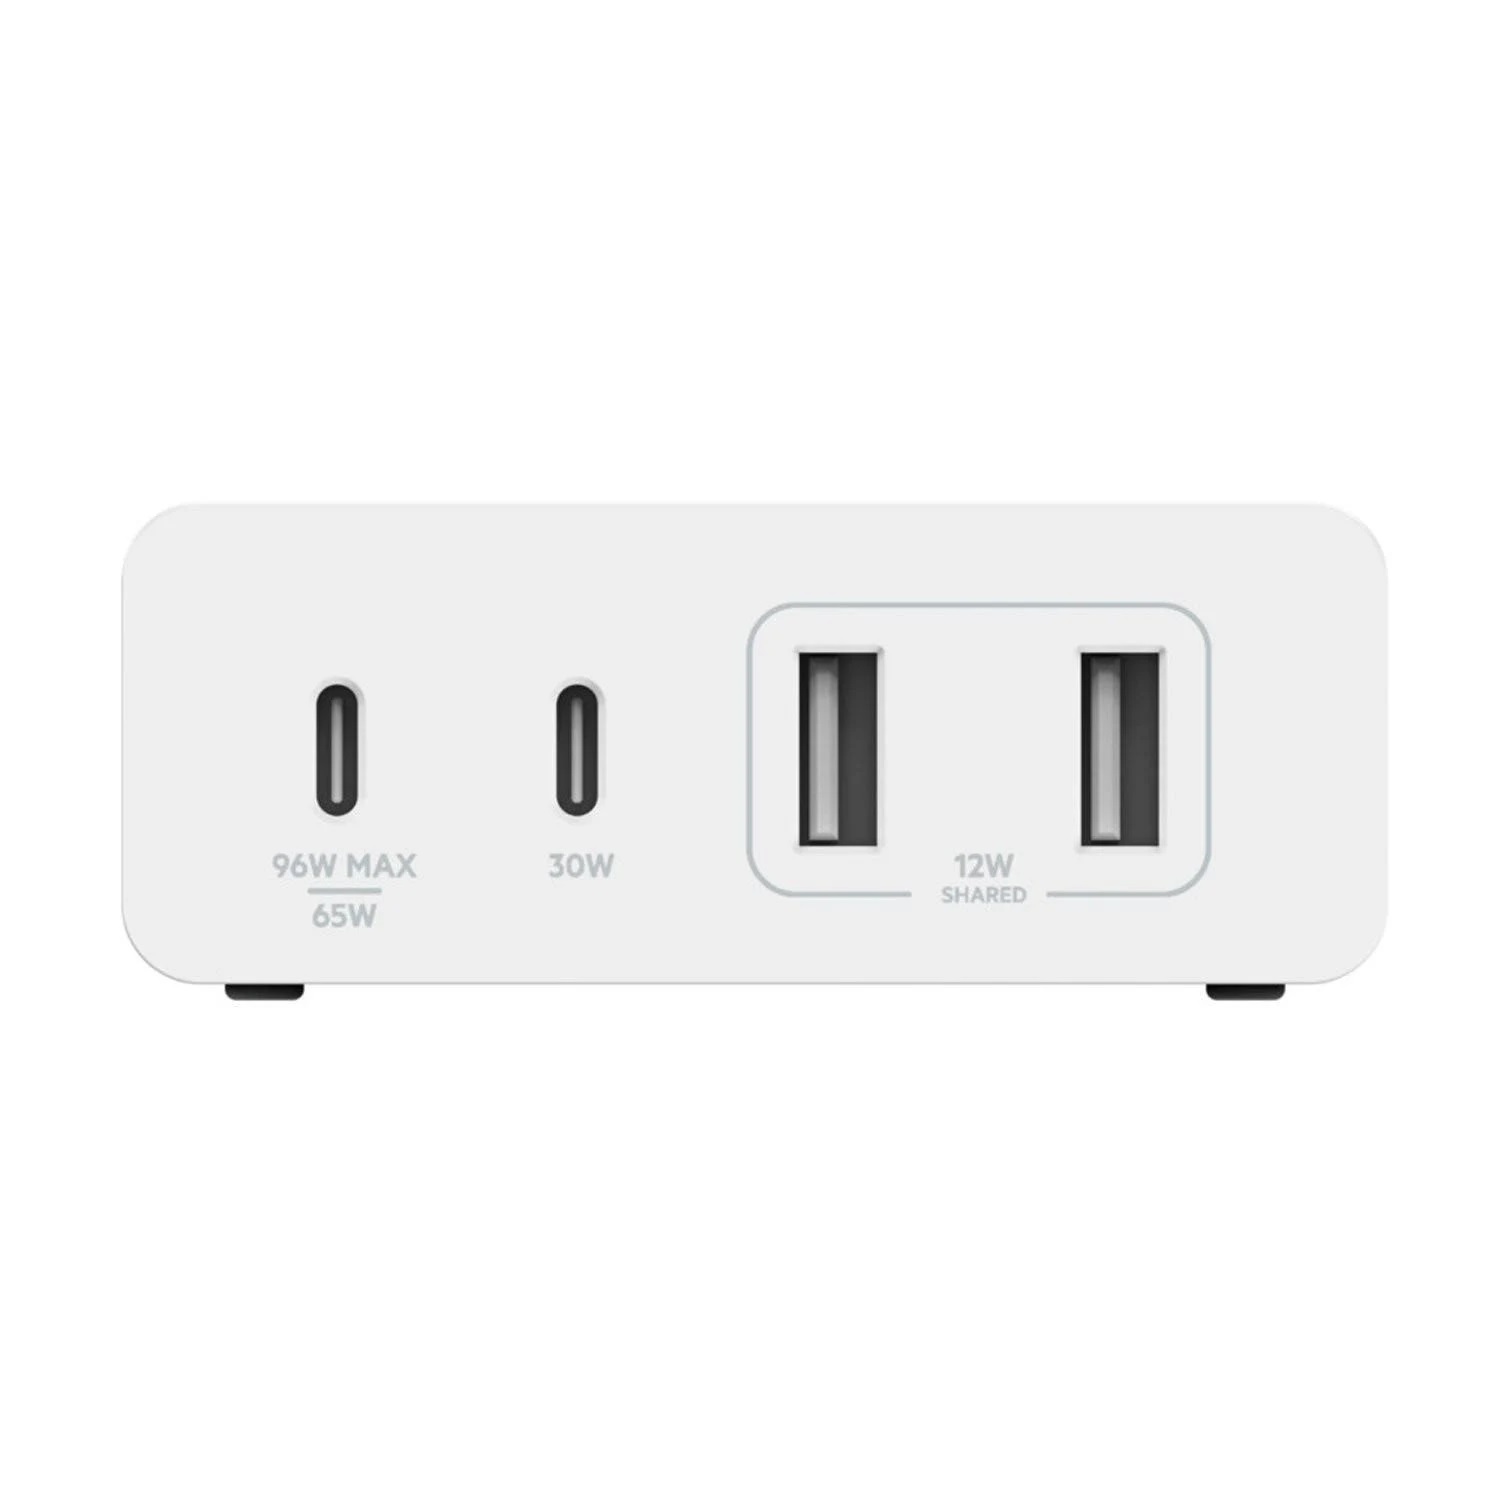 Belkin BoostCharge Pro 4-Port GaN Charger 108W - White(WCH010auWH), 2xUSB-C  2xUSB-A,2M Cable,Intelligent and Fast Charger,Compact Laptop Charger,2YR